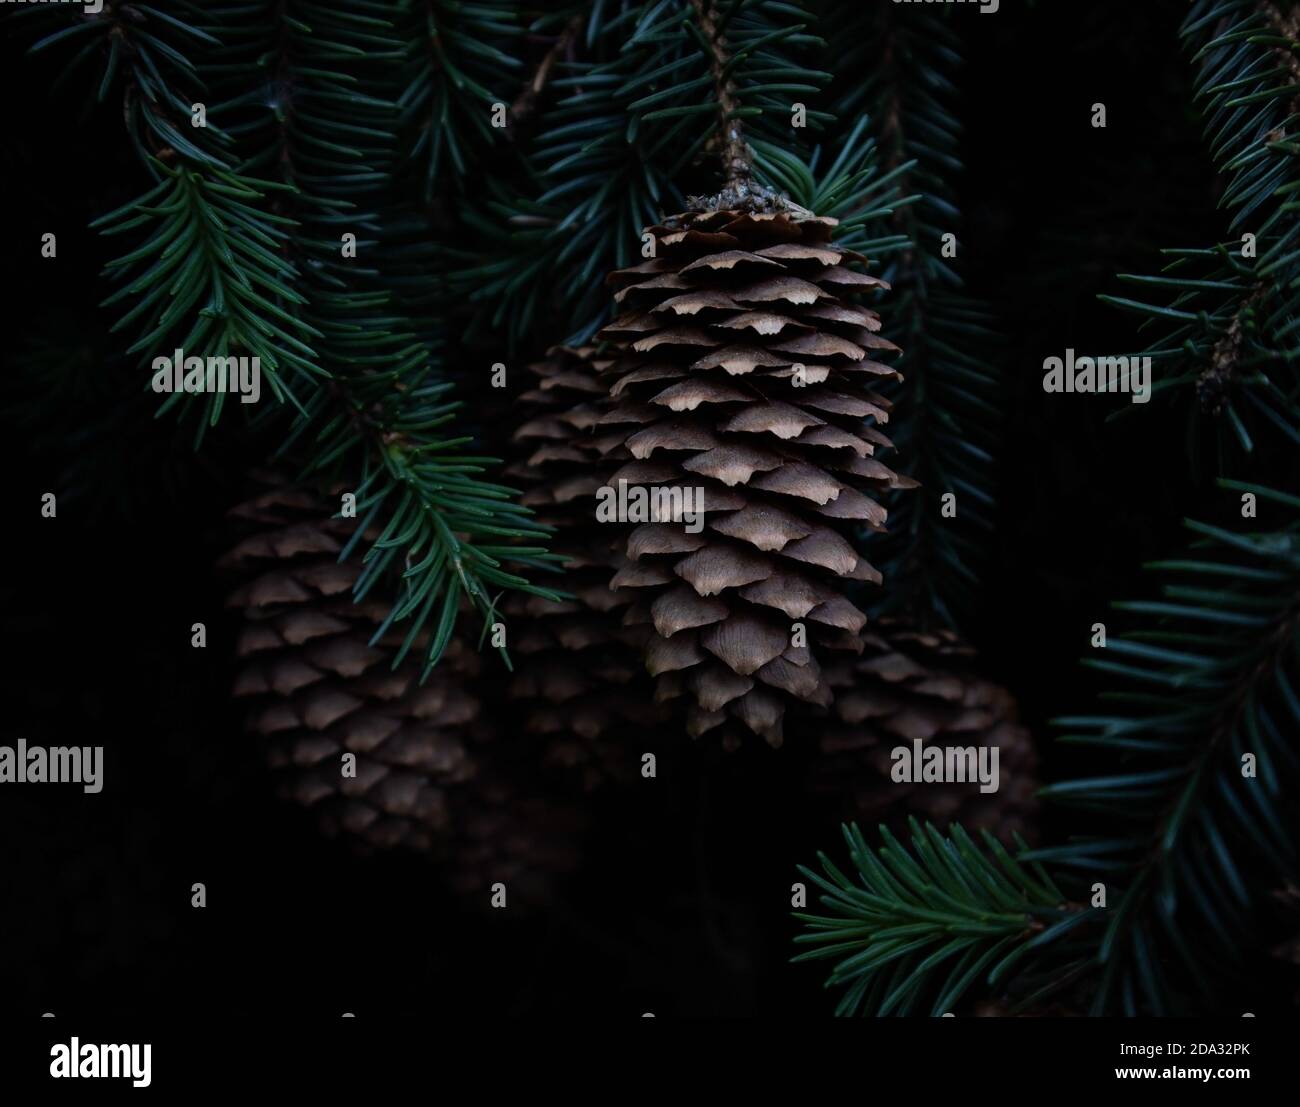 Close-up of pine cones on a branch in forest. Black background. Christmas concept. New Year dark background. Spruce needles. Pine cones and fir branch Stock Photo